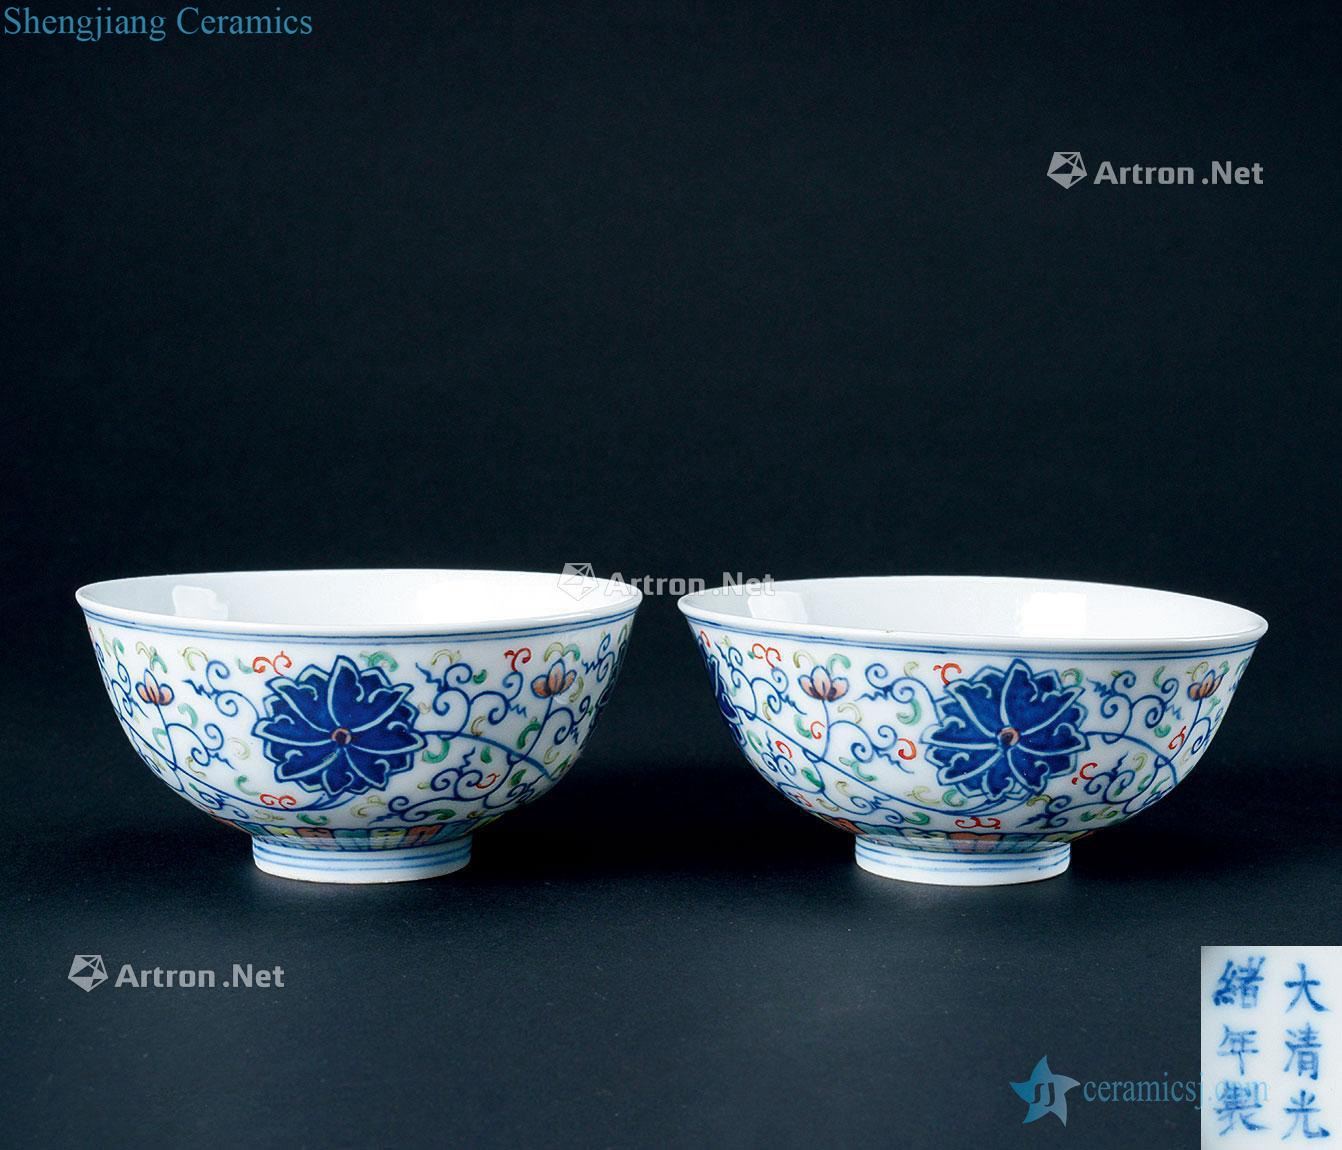 In the qing dynasty (1644-1911) blue and white enamel bound branch lotus green-splashed bowls (a)